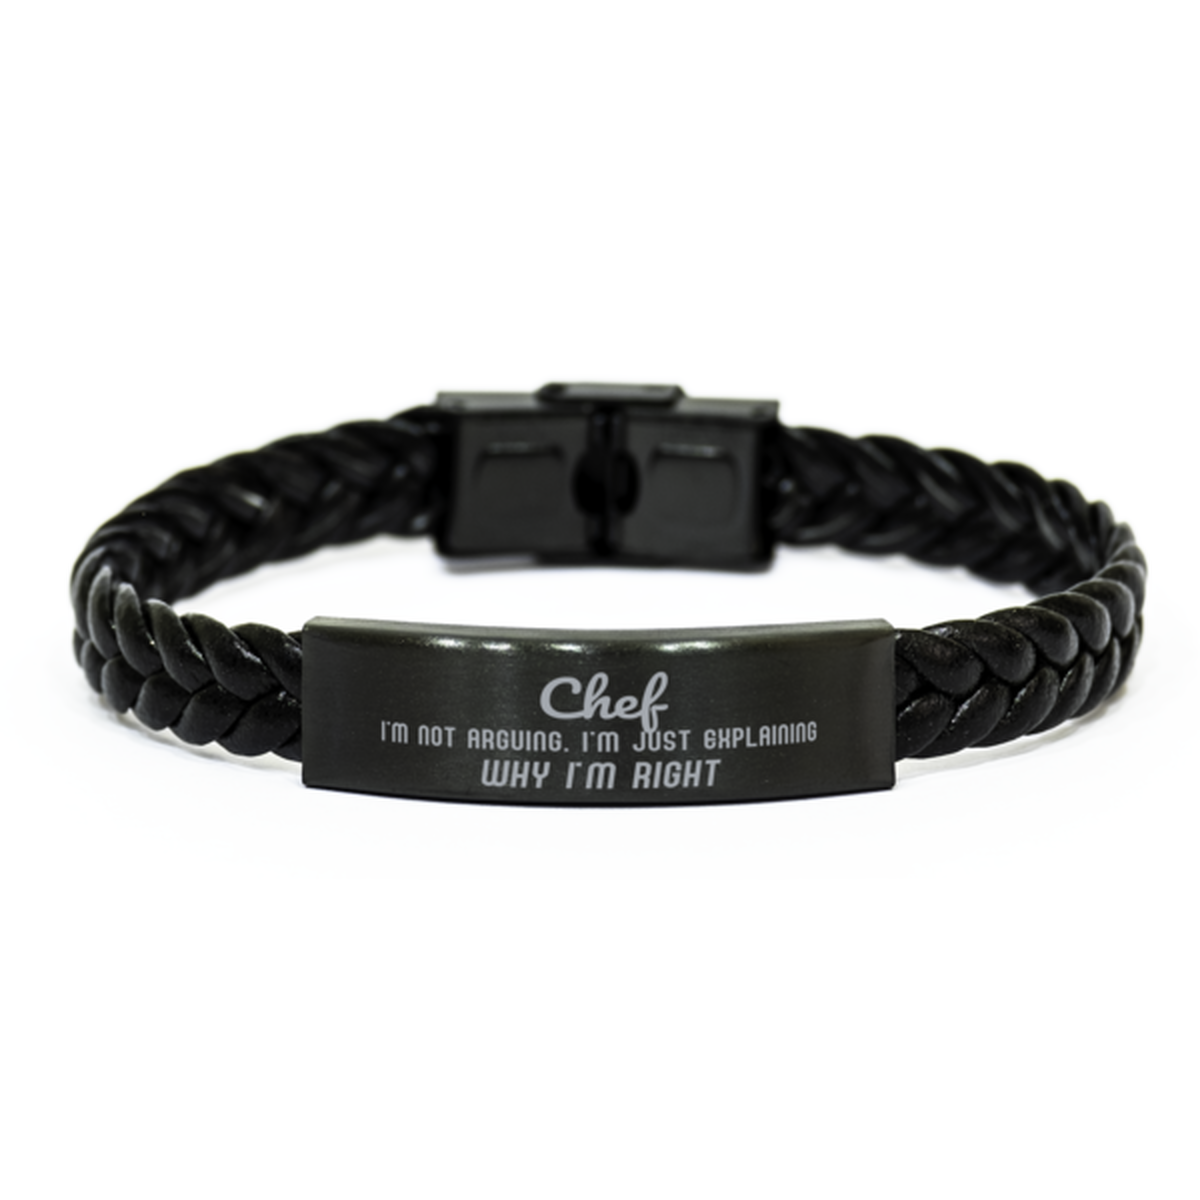 Chef I'm not Arguing. I'm Just Explaining Why I'm RIGHT Braided Leather Bracelet, Graduation Birthday Christmas Chef Gifts For Chef Funny Saying Quote Present for Men Women Coworker